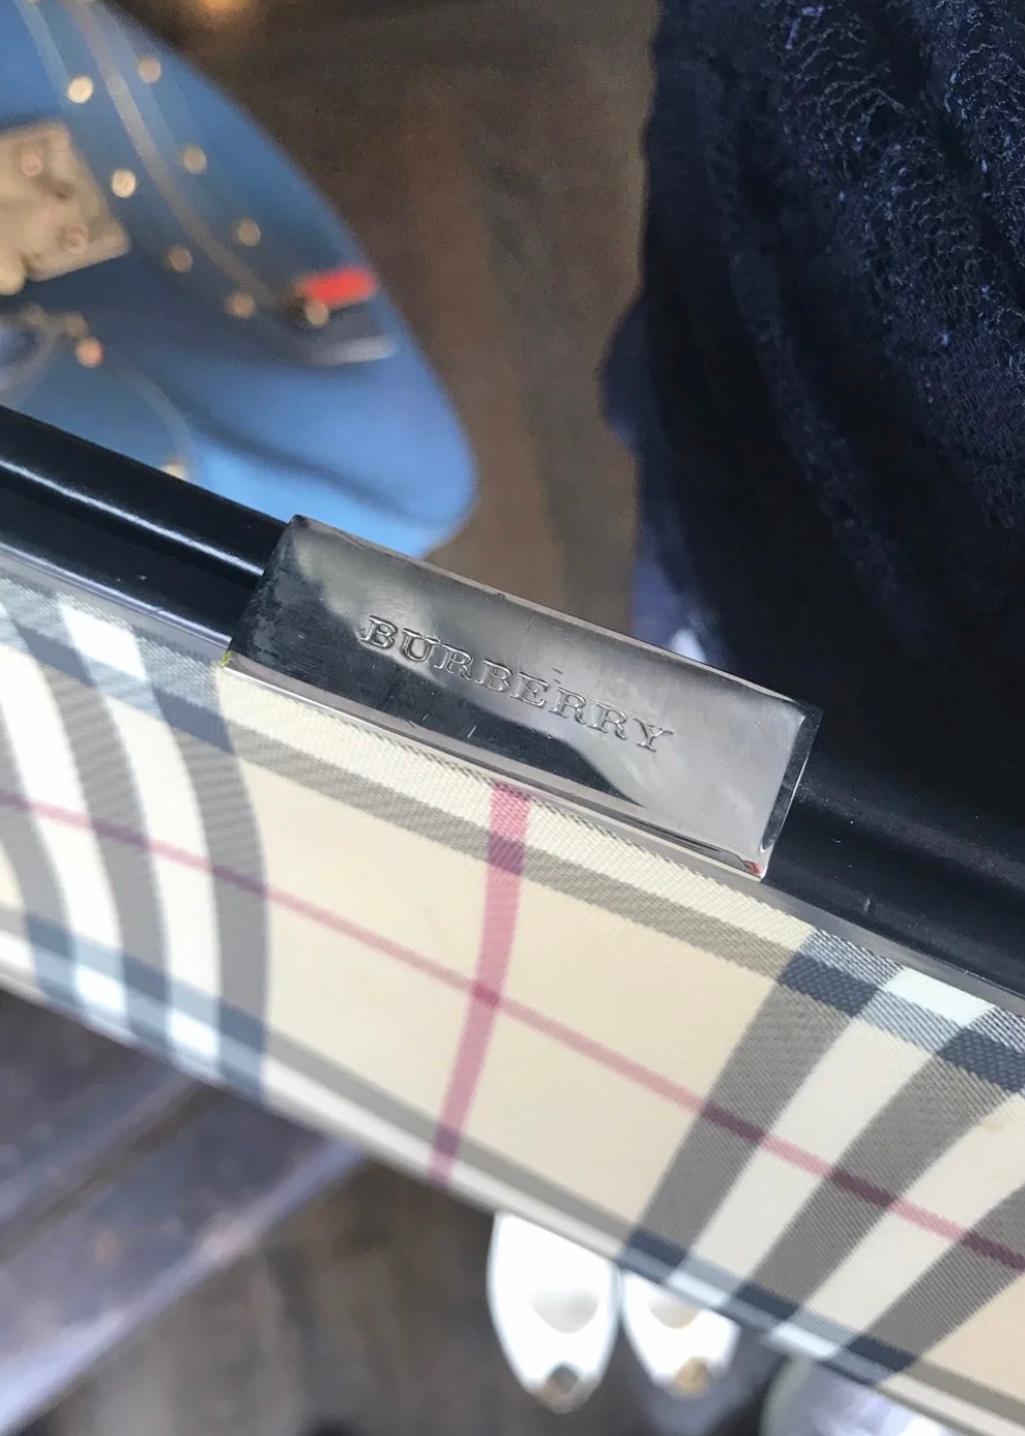 Burberry Plaid Canvas Handbag In Good Condition For Sale In Roslyn, NY